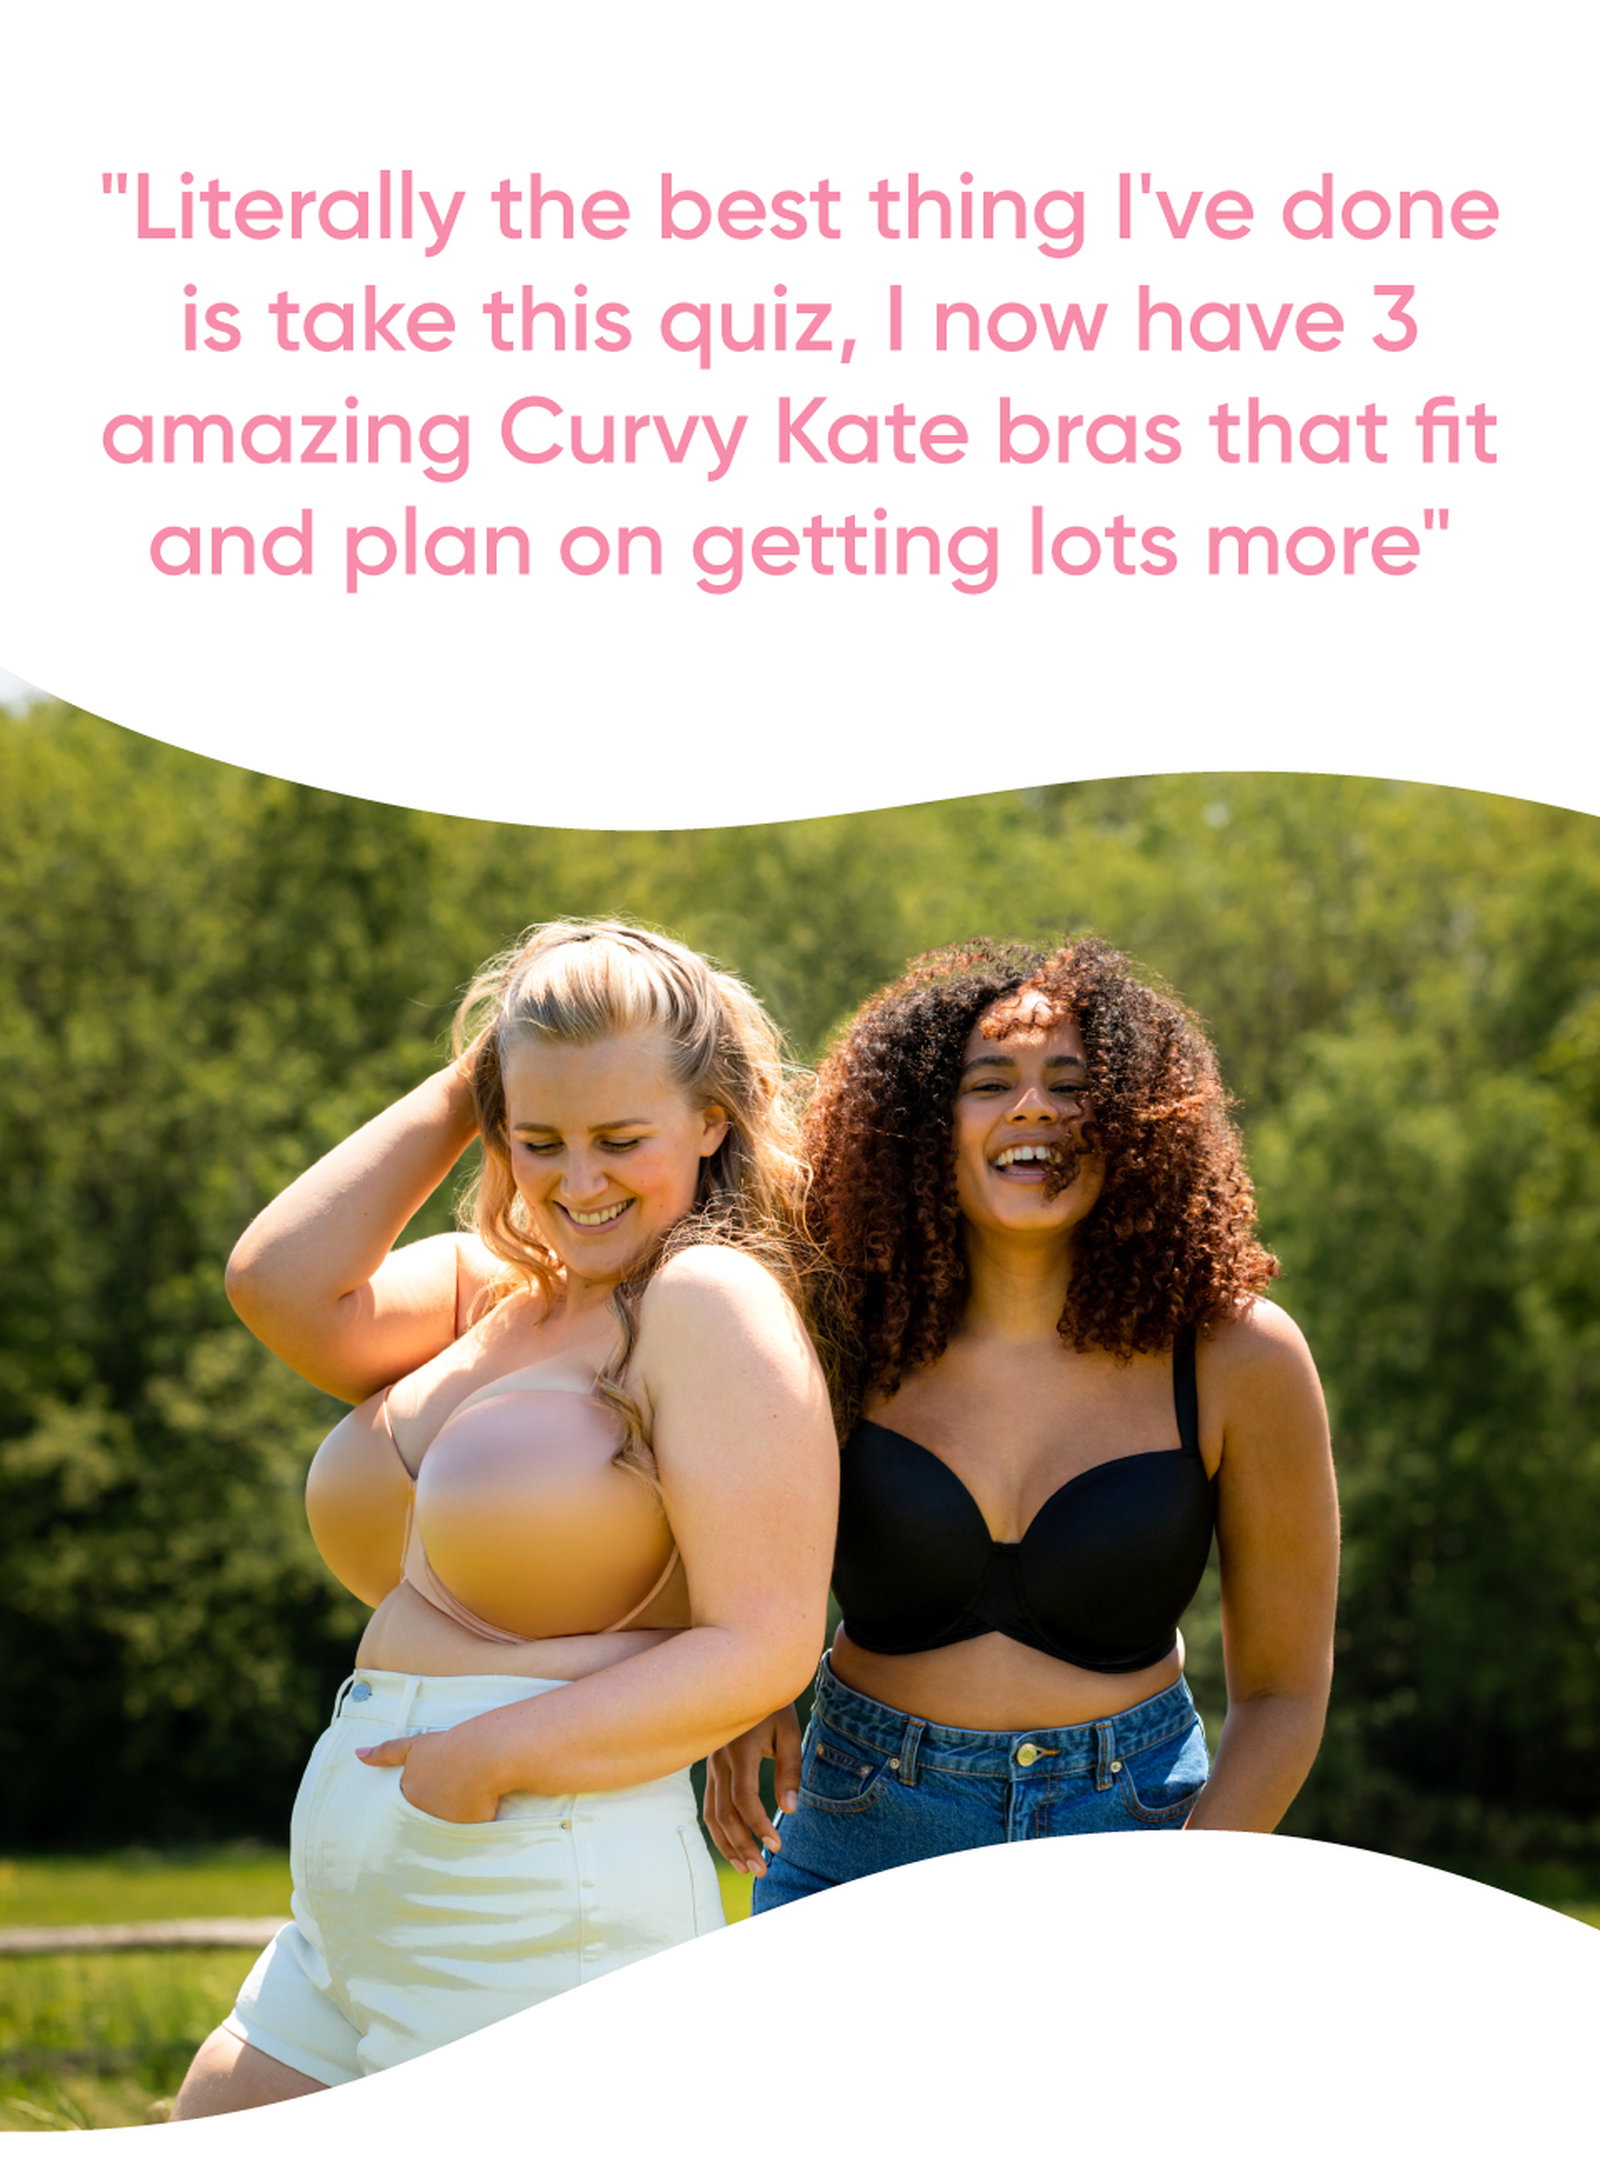 Curvy Kate: Find Out Your Bra Size!